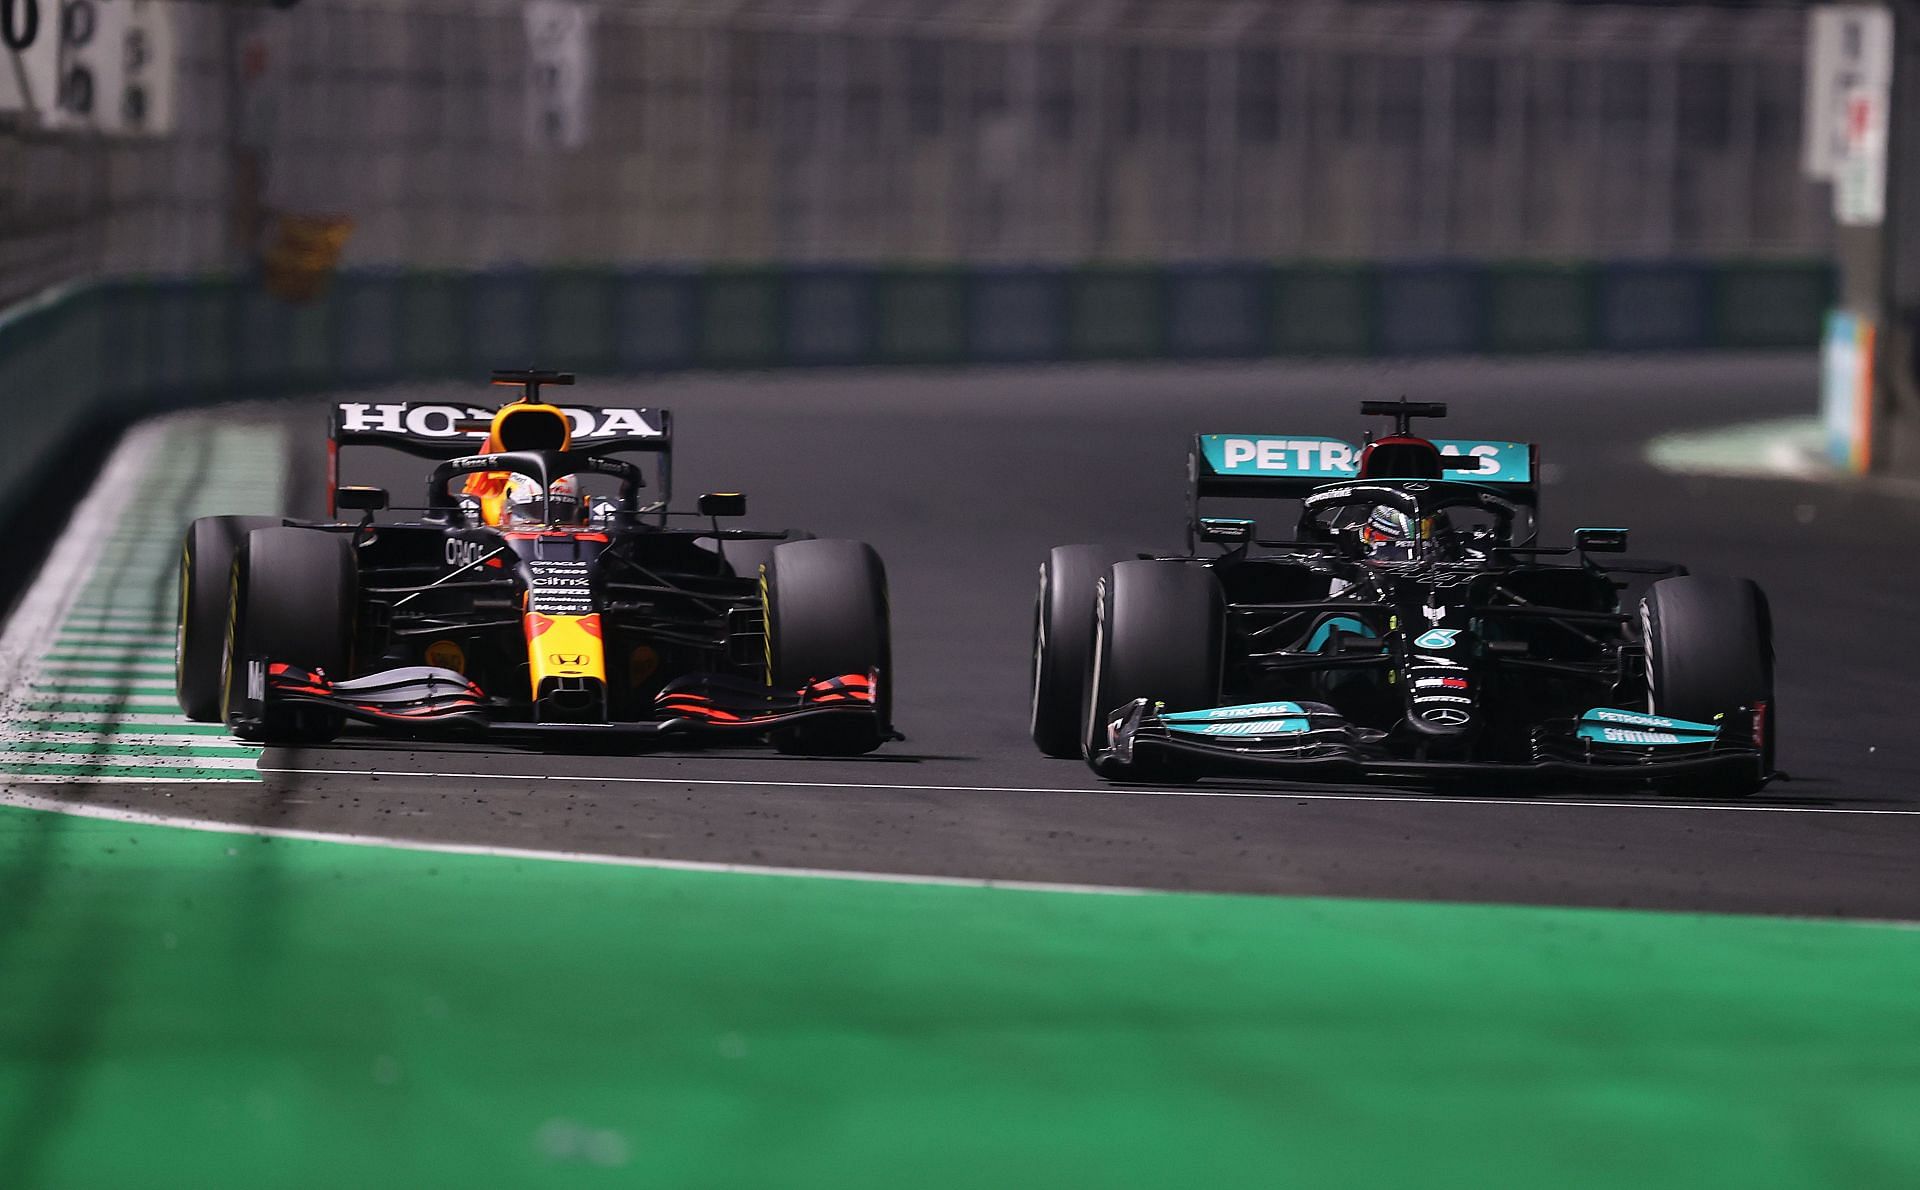 Max Verstappen (left) and Lewis Hamilton (right) duel in the 2021 Saudi Arabian Grand Prix (Photo by Lars Baron/Getty Images)